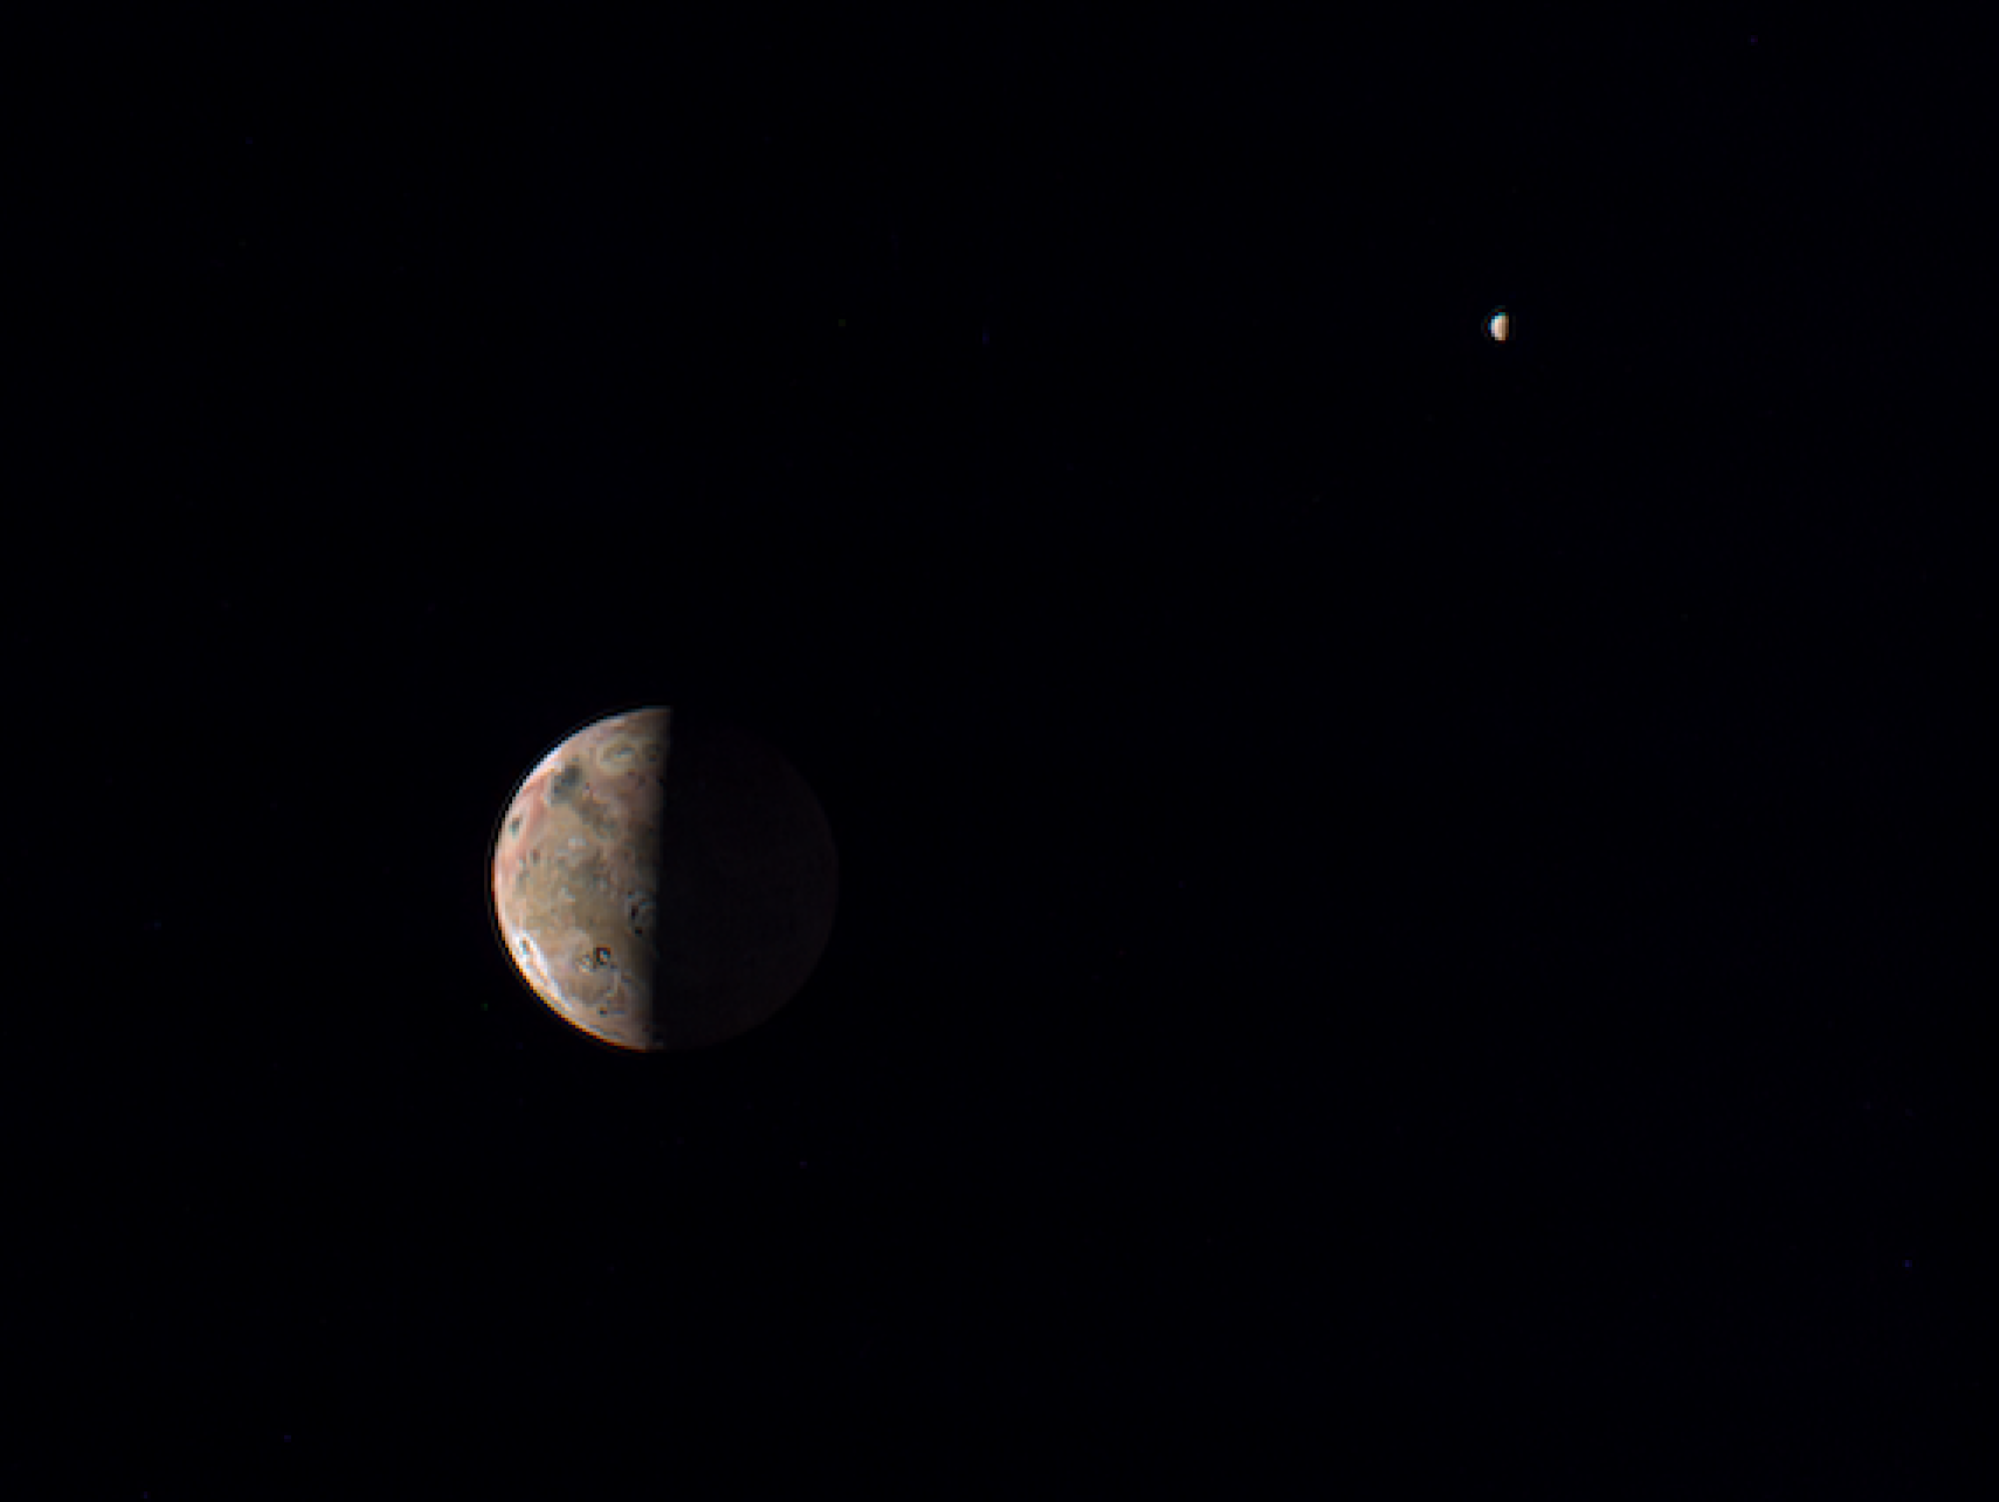 The Jovian moon Io, in the foreground, with the ice-clad moon Europa in the distance.